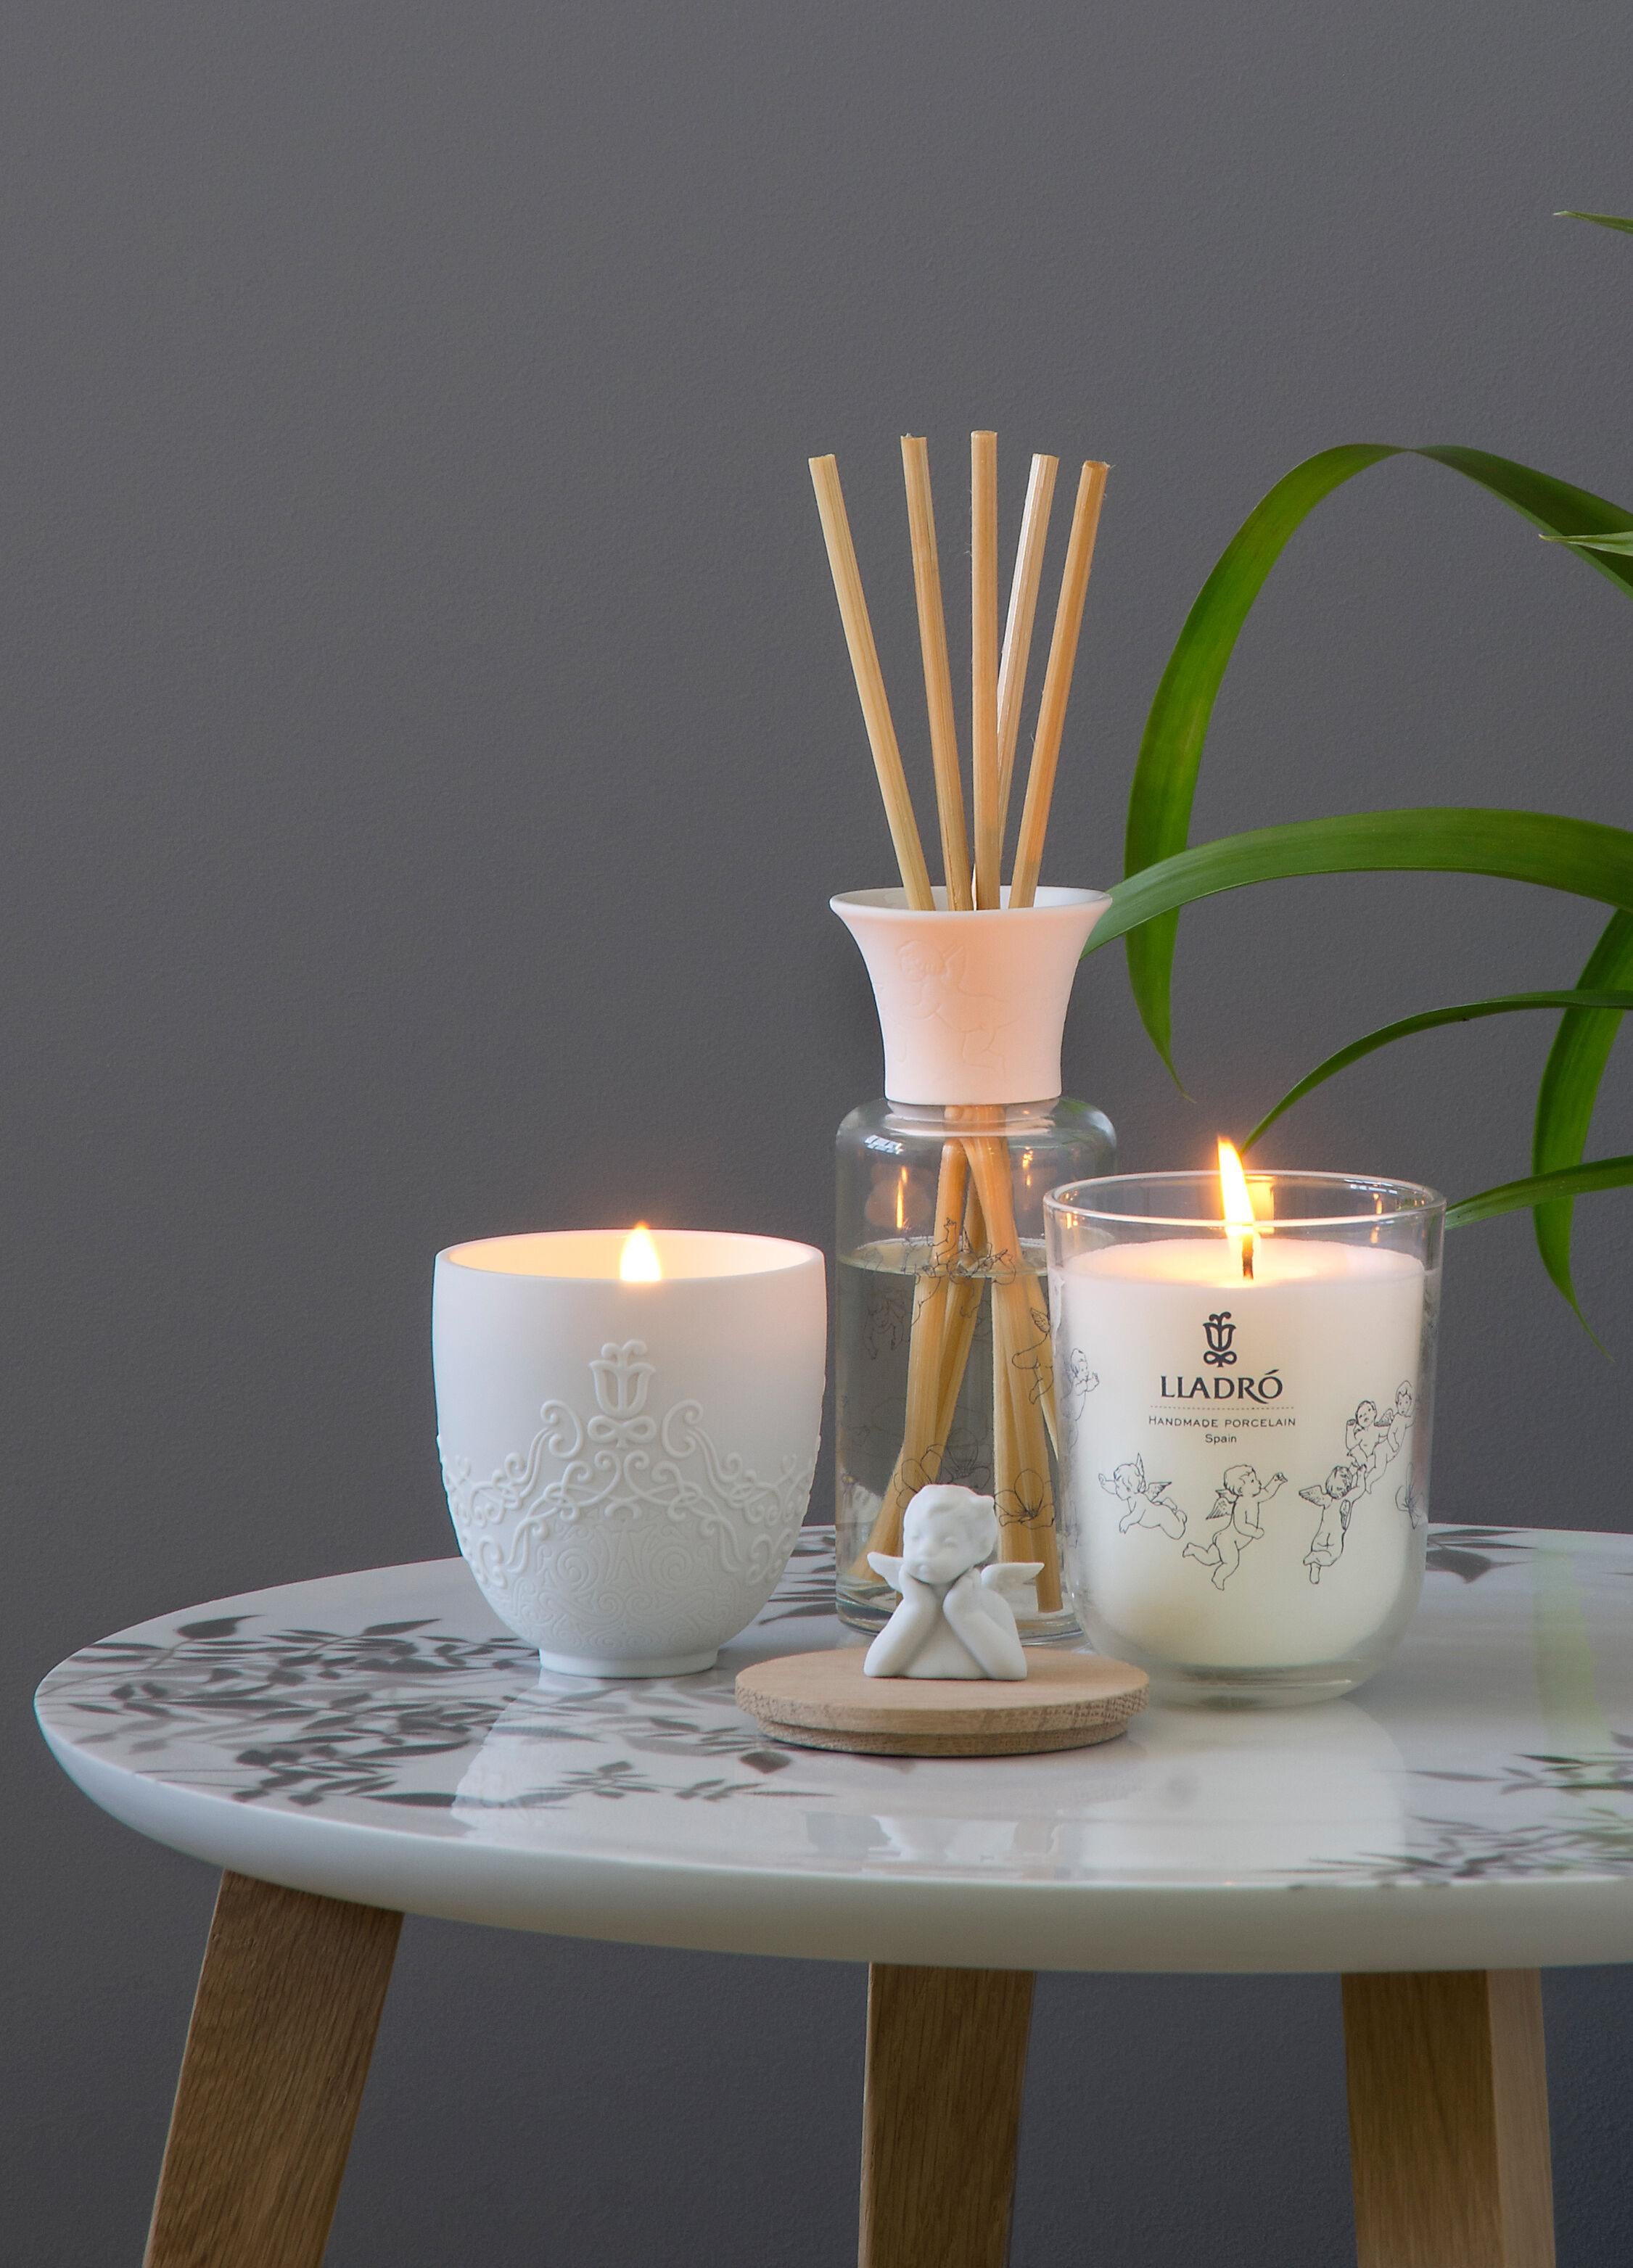 Missing you candle. Tropical blossoms scent
In stock in Los Angeles

A floral scented candle for home with a natural oak wood lid topped with an angel in Matte white porcelain. The container is made of glass decorated with cherubs and